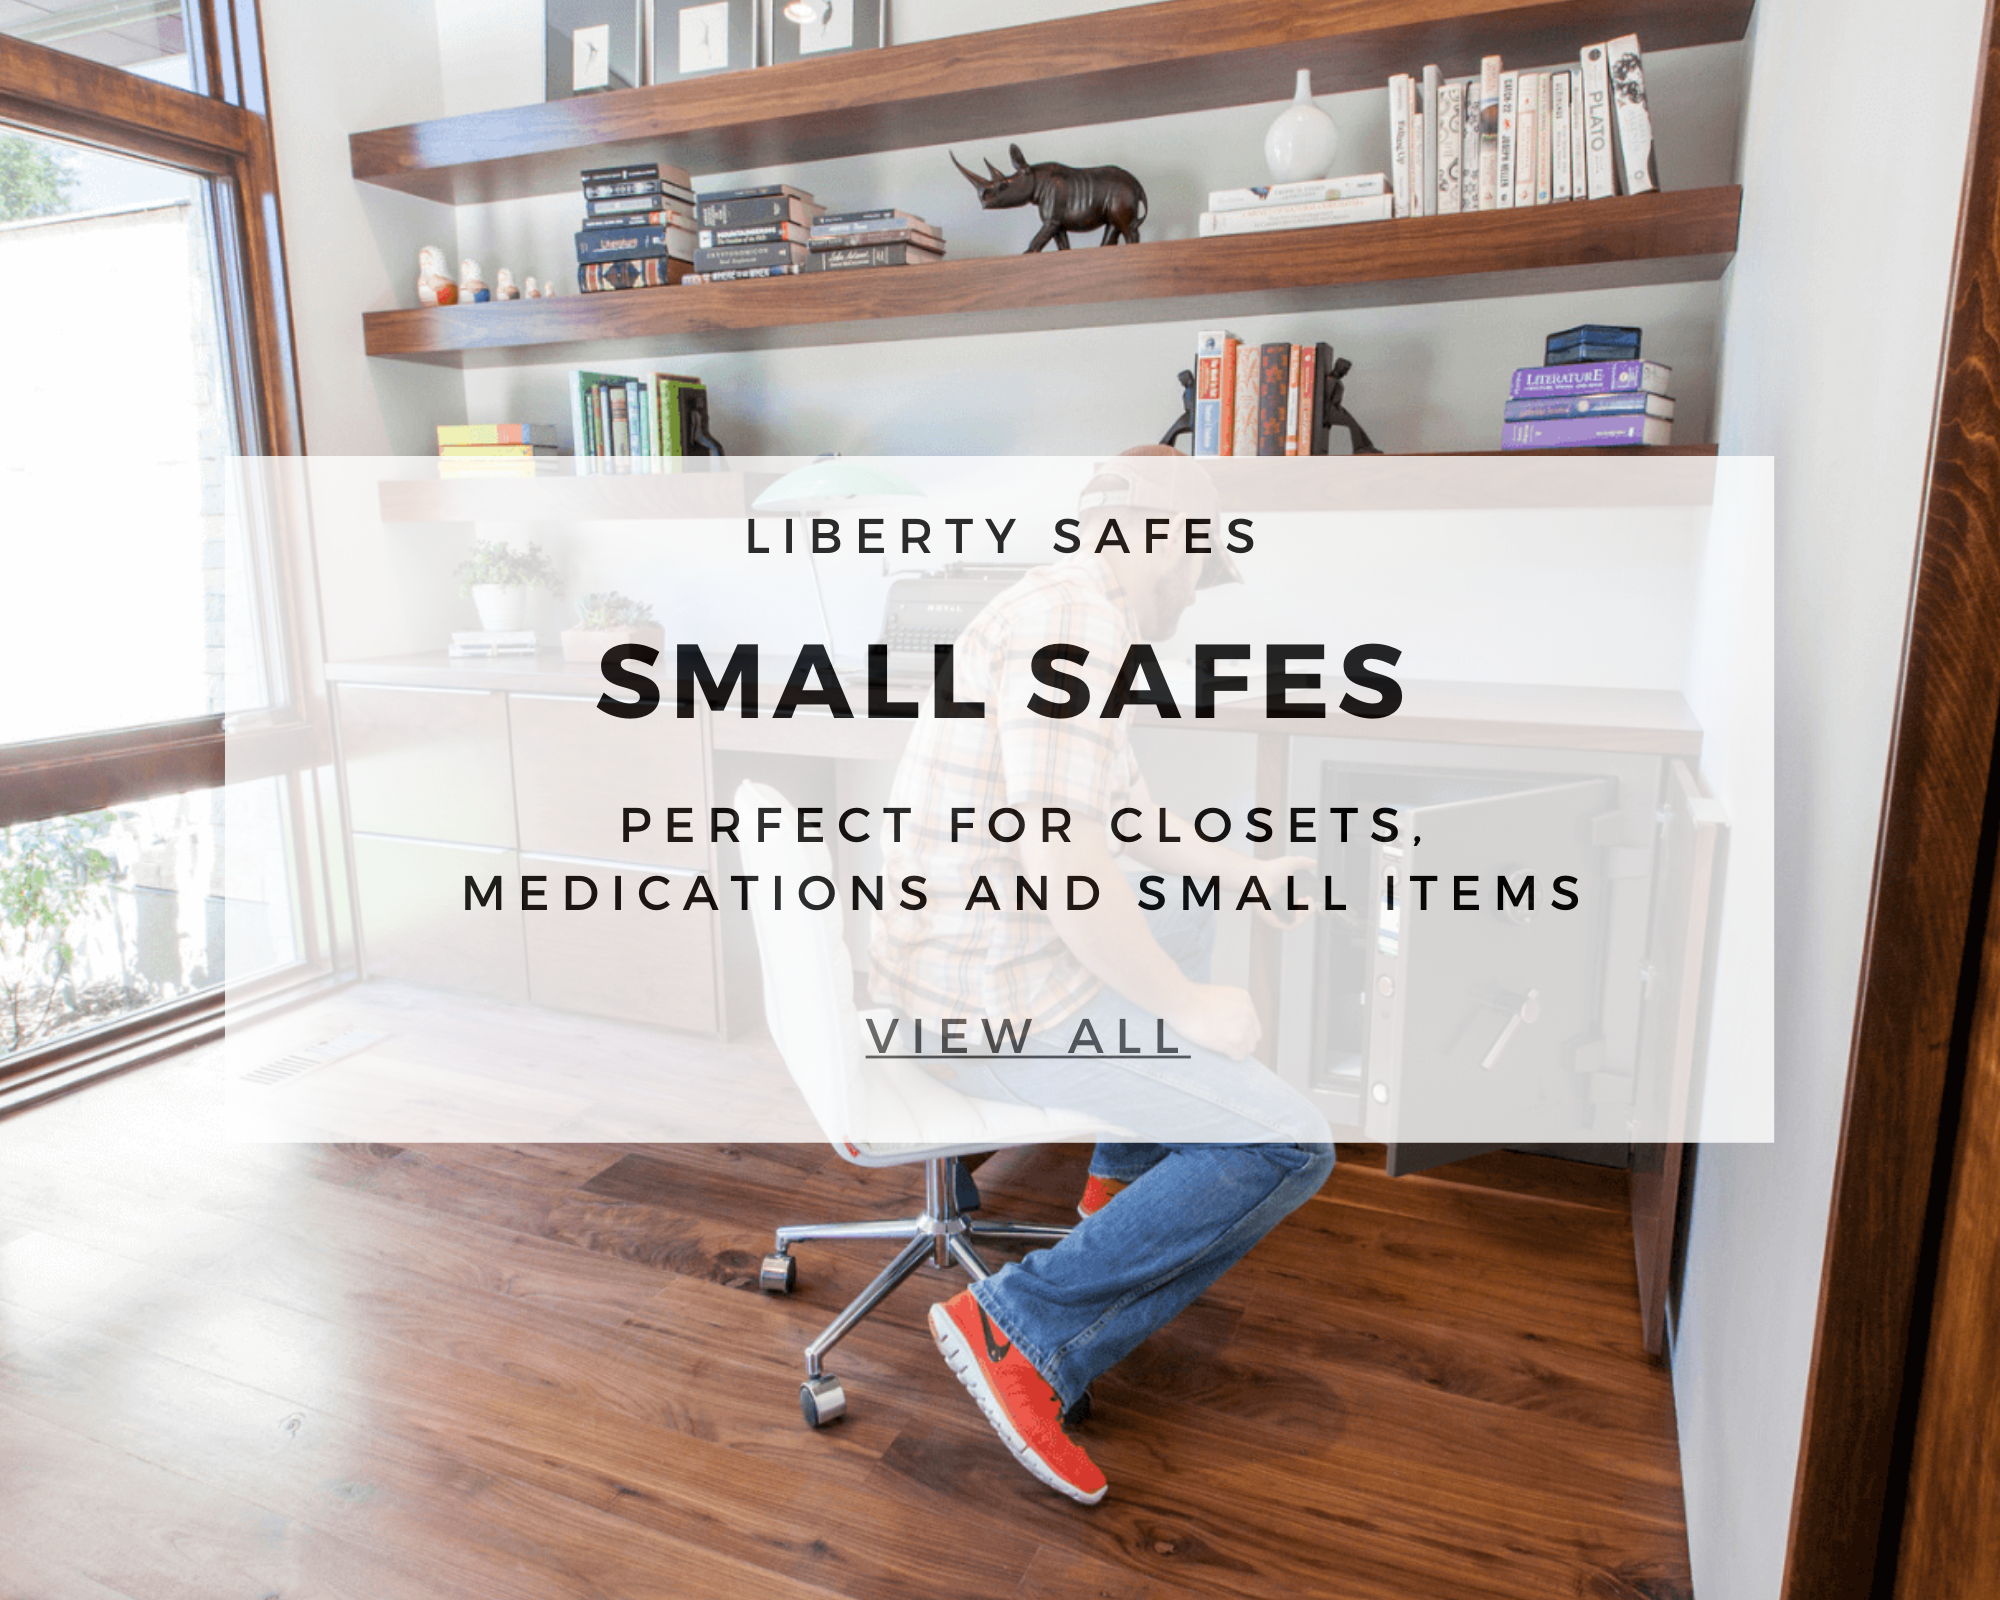 Small Safes Perfect for closets, medications, and small items